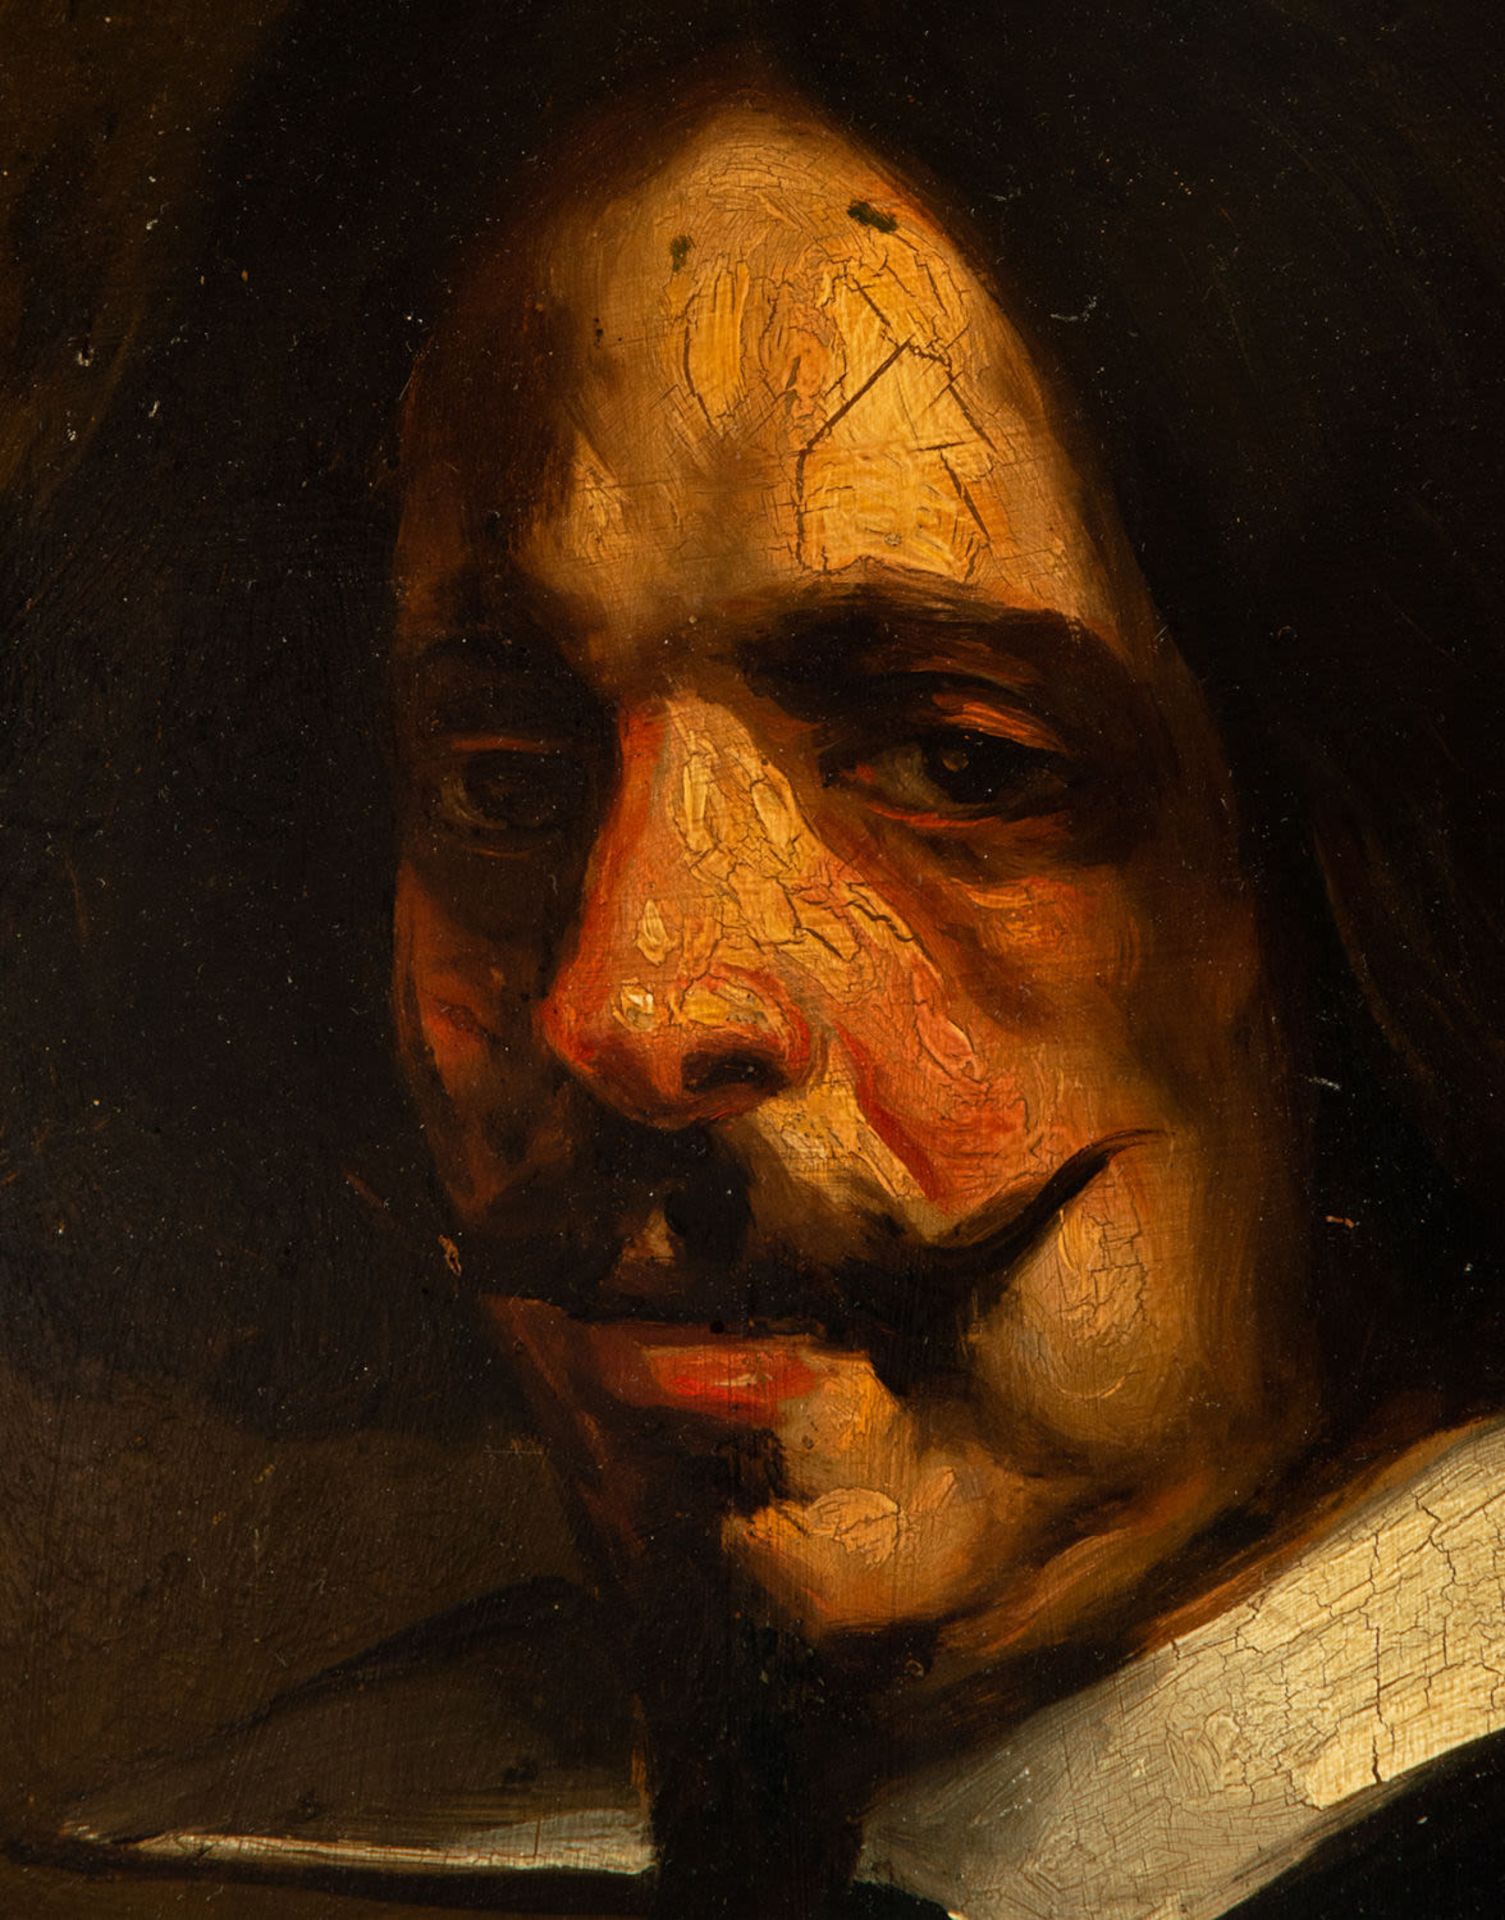 Self-portrait of Velázquez, following models of the 17th century, Spanish school of the 19th century - Image 3 of 6